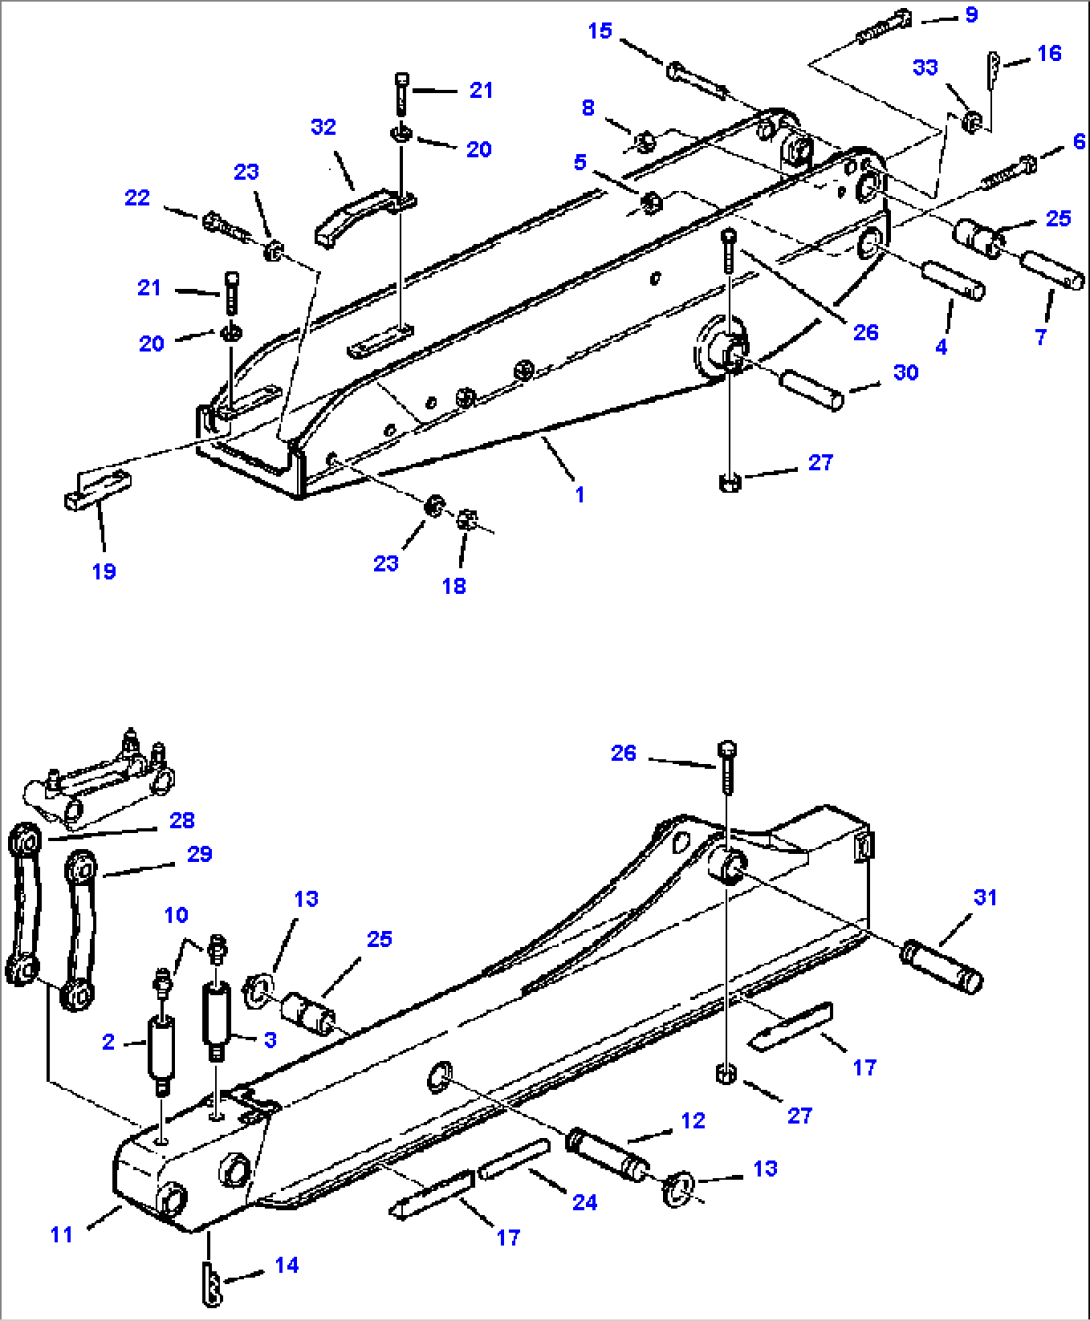 FIG. T2015-01A0 TELESCOPIC ARM